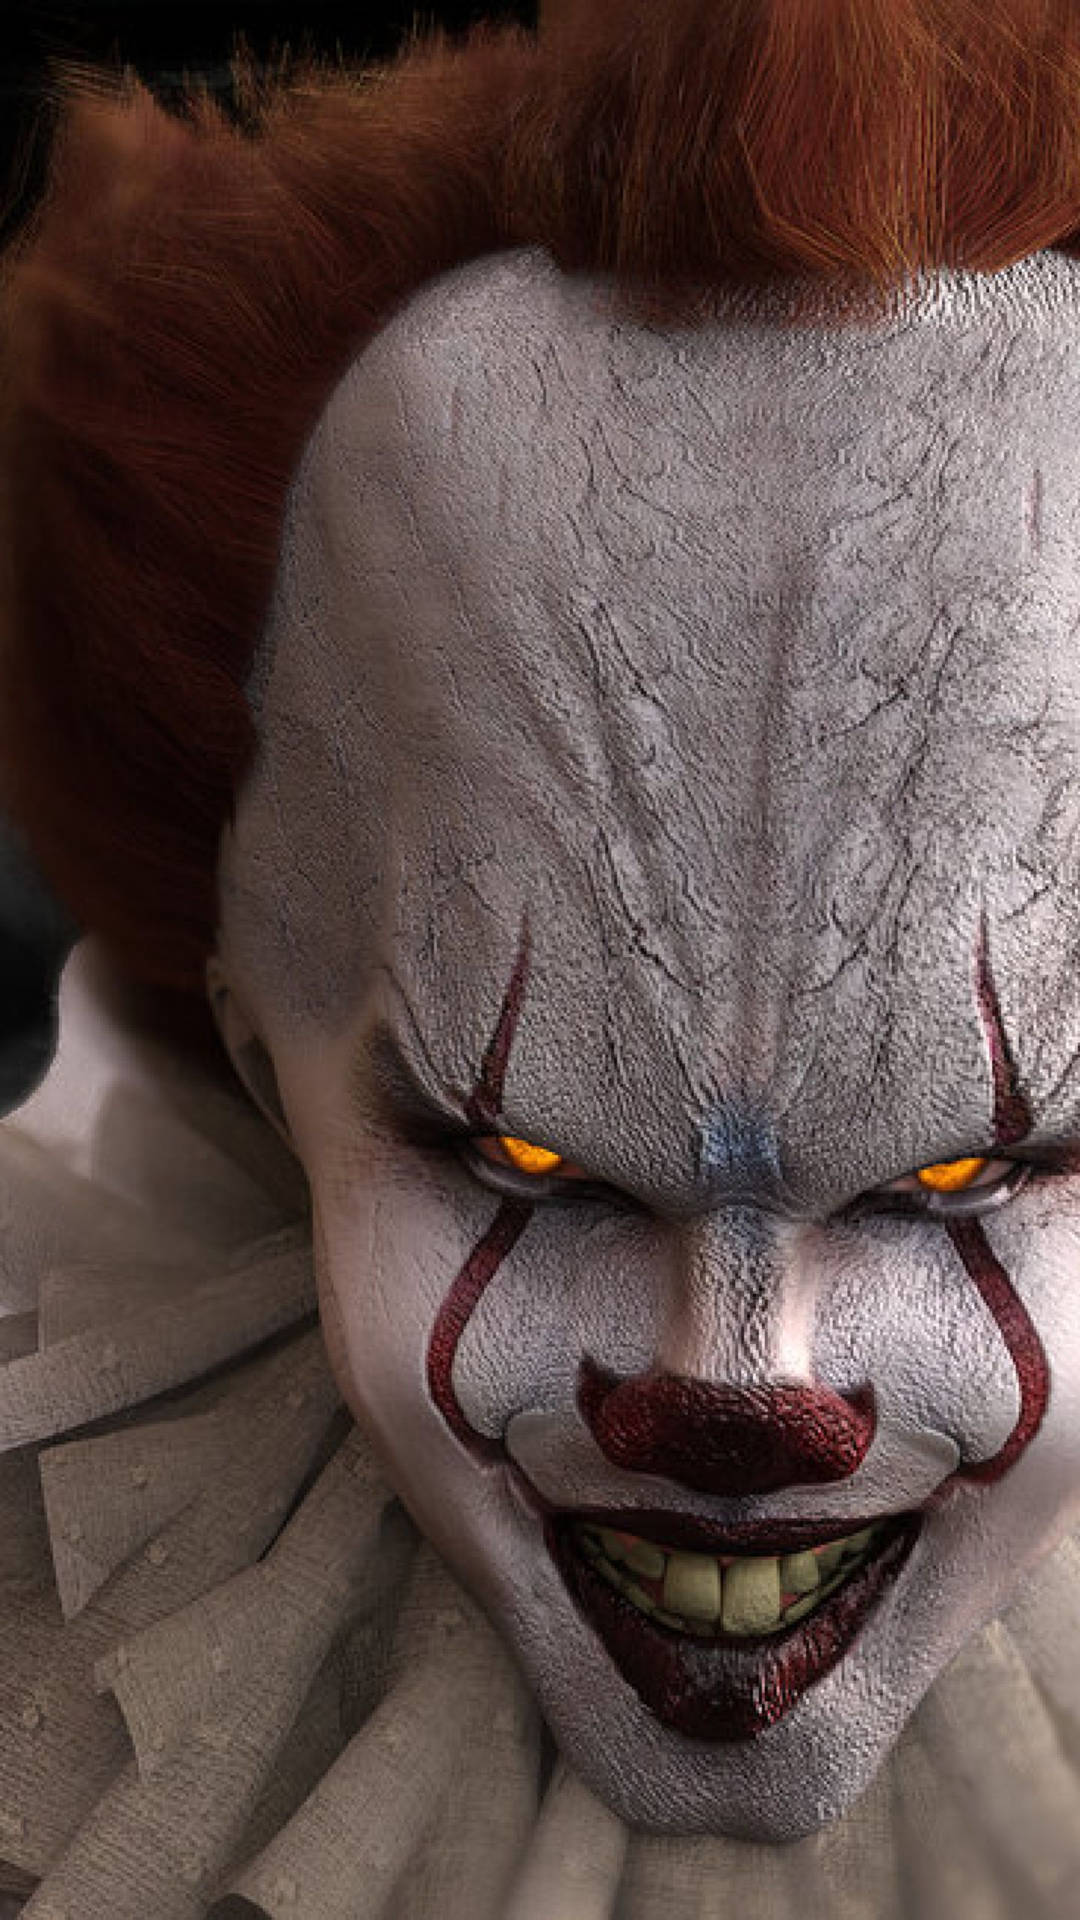 Download Clown Face Pennywise Wallpaper